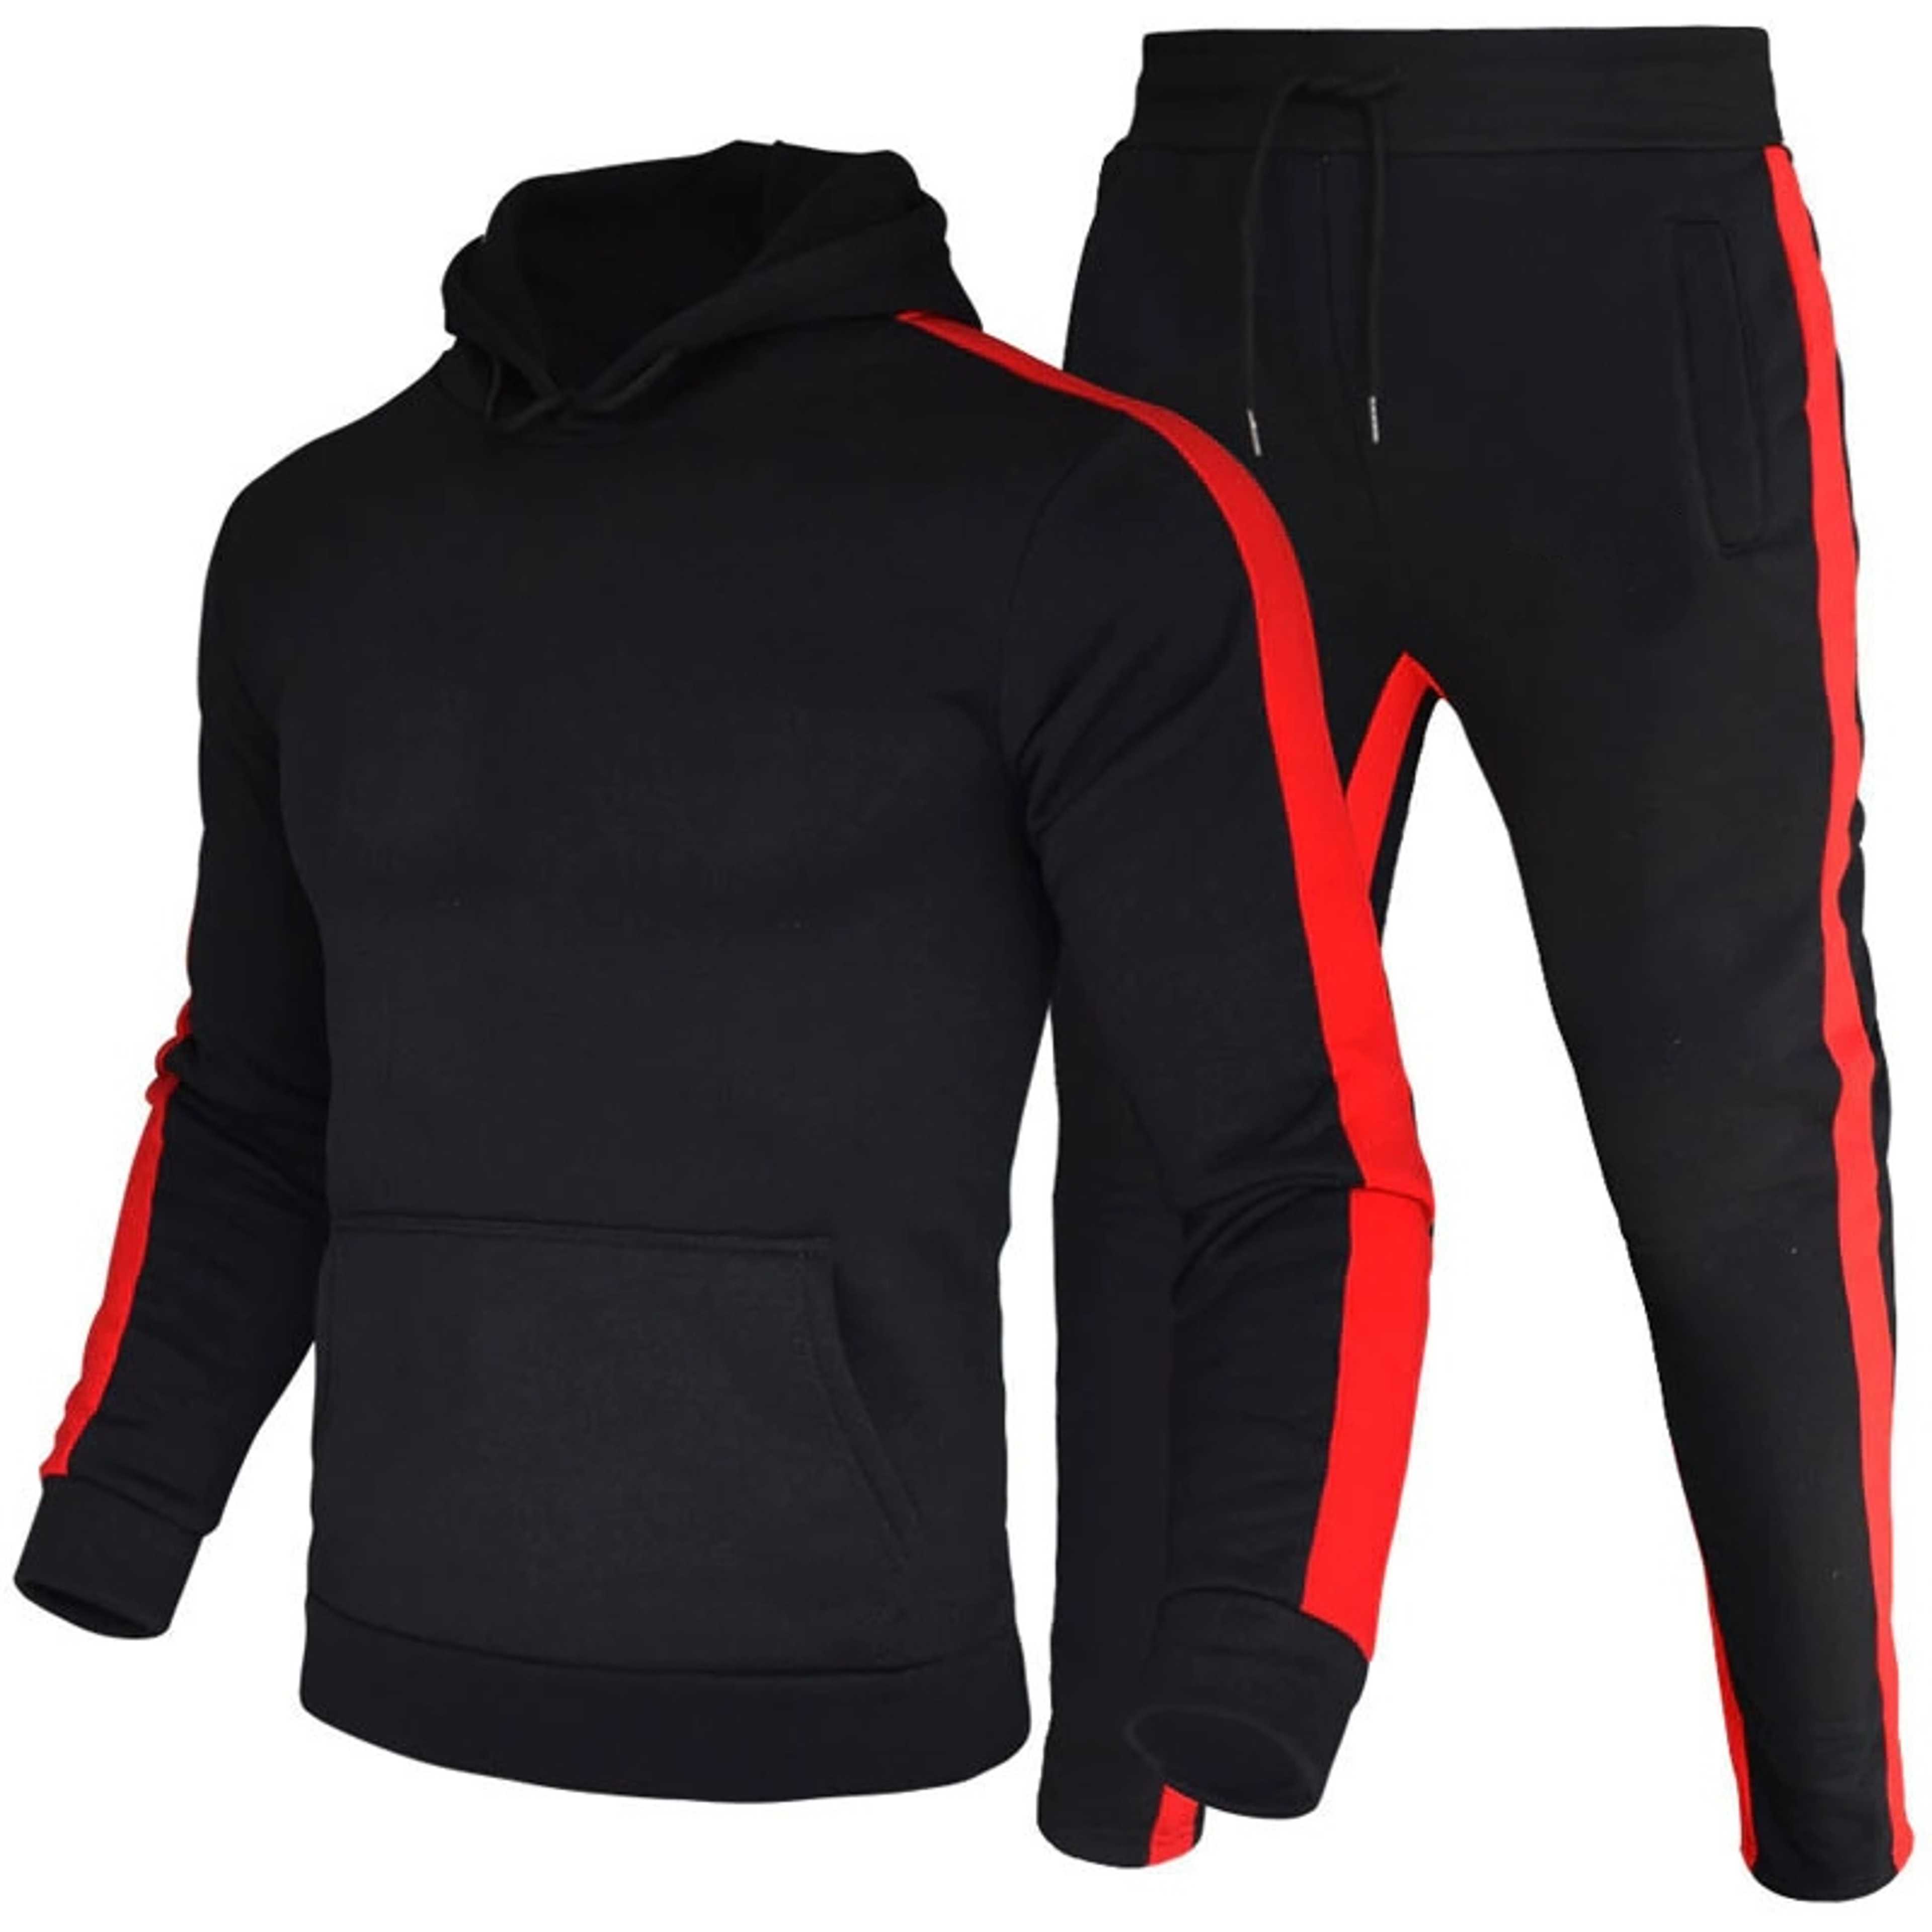 Men's Sweatsuit Pullover Hoodie Tops and Pants Set Casual Sports Tracksuit